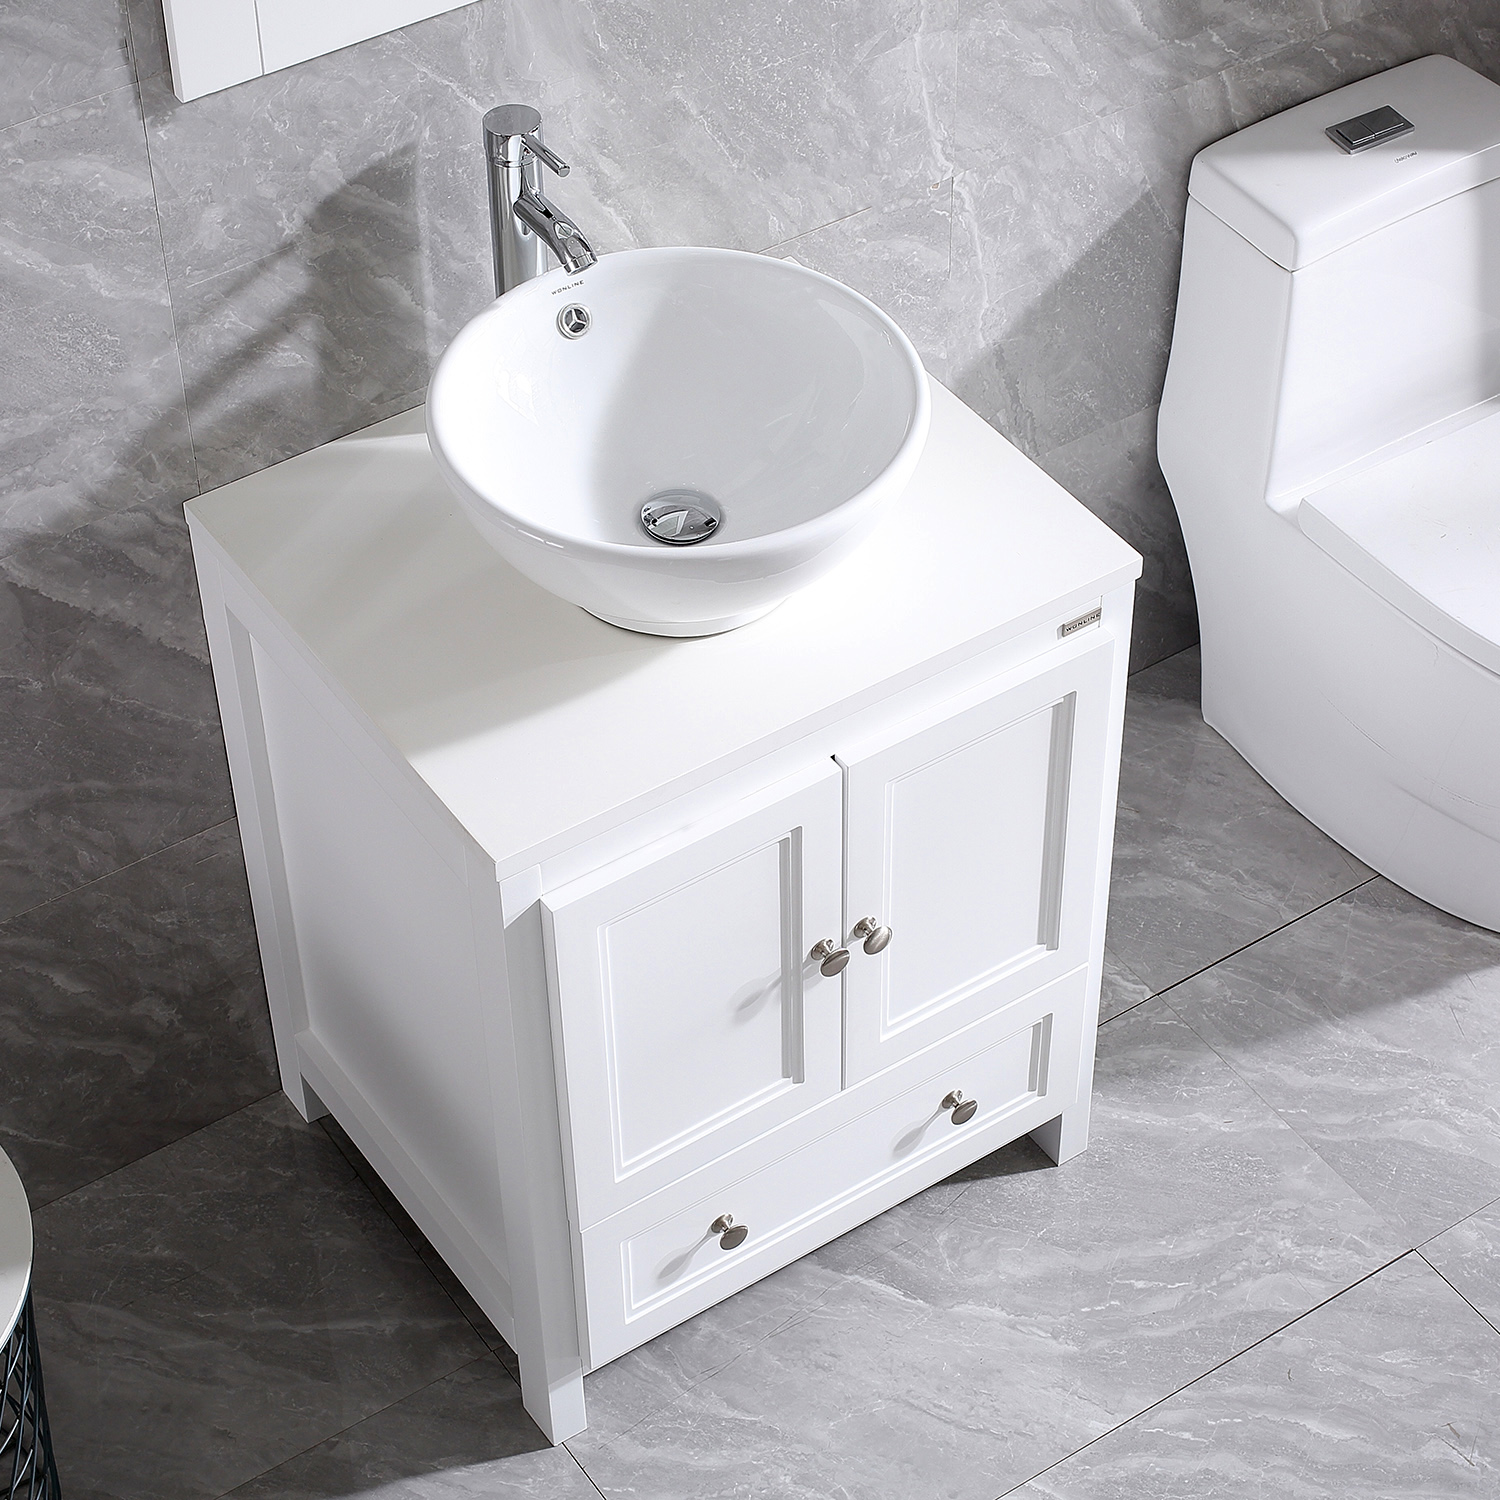 Wonline Round White Porcelain Ceramic Bathroom Vessel Sink with Overflow, Equipped with Chrome Faucet Pop-up Drain Combo - image 3 of 4